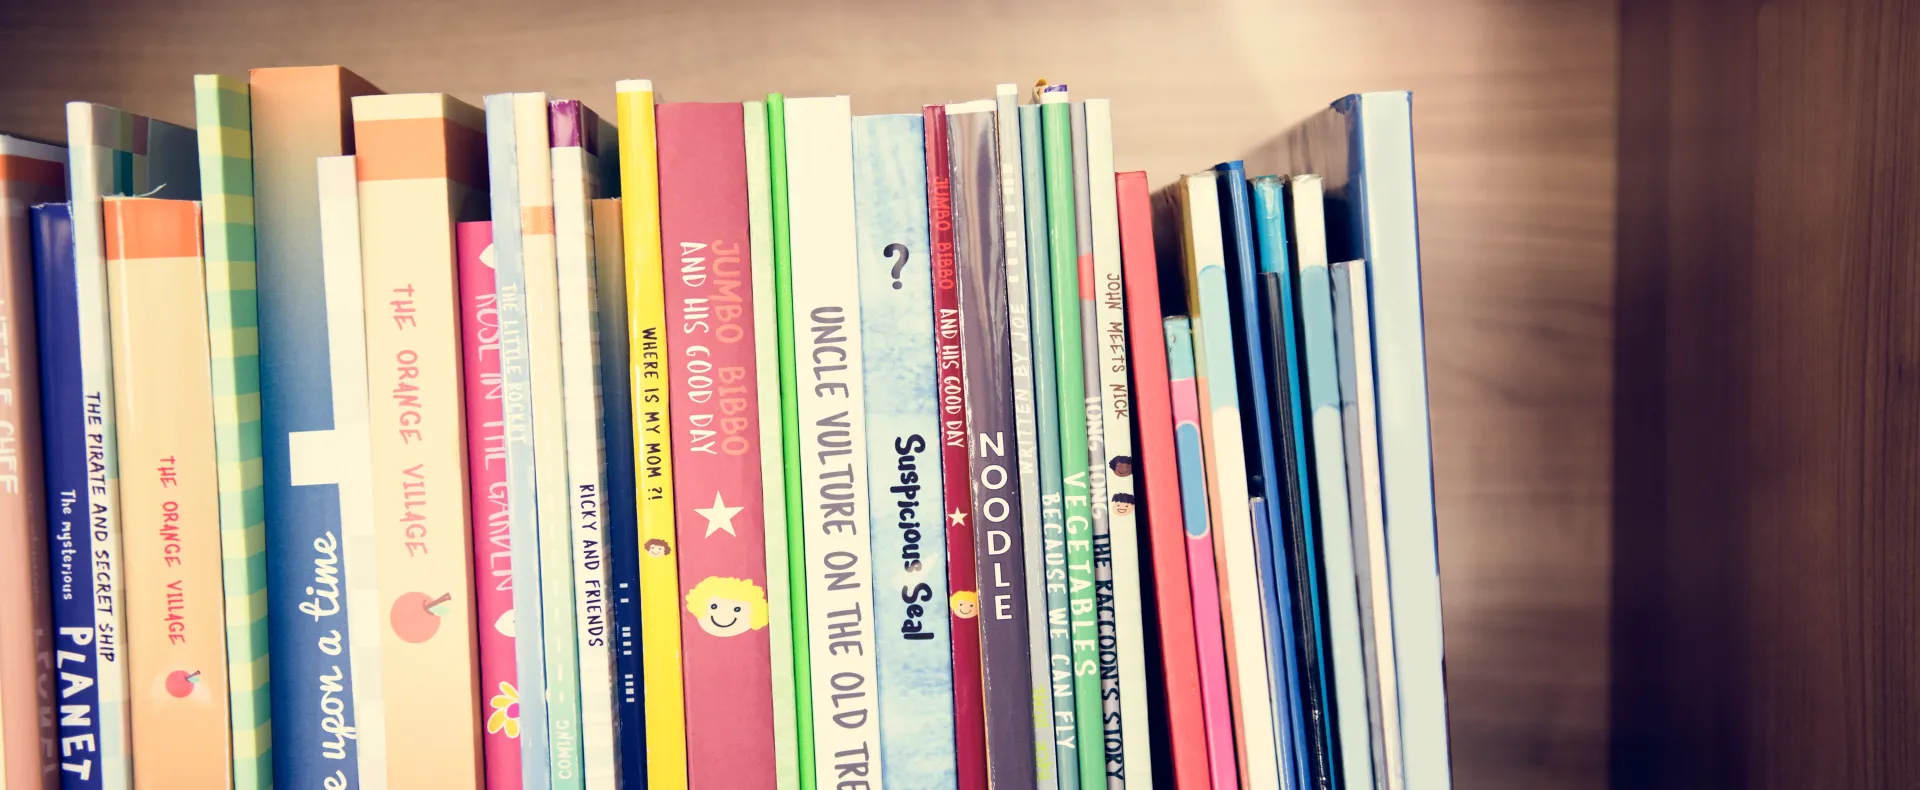 Children's books sit side-by-side each other on a shelf.